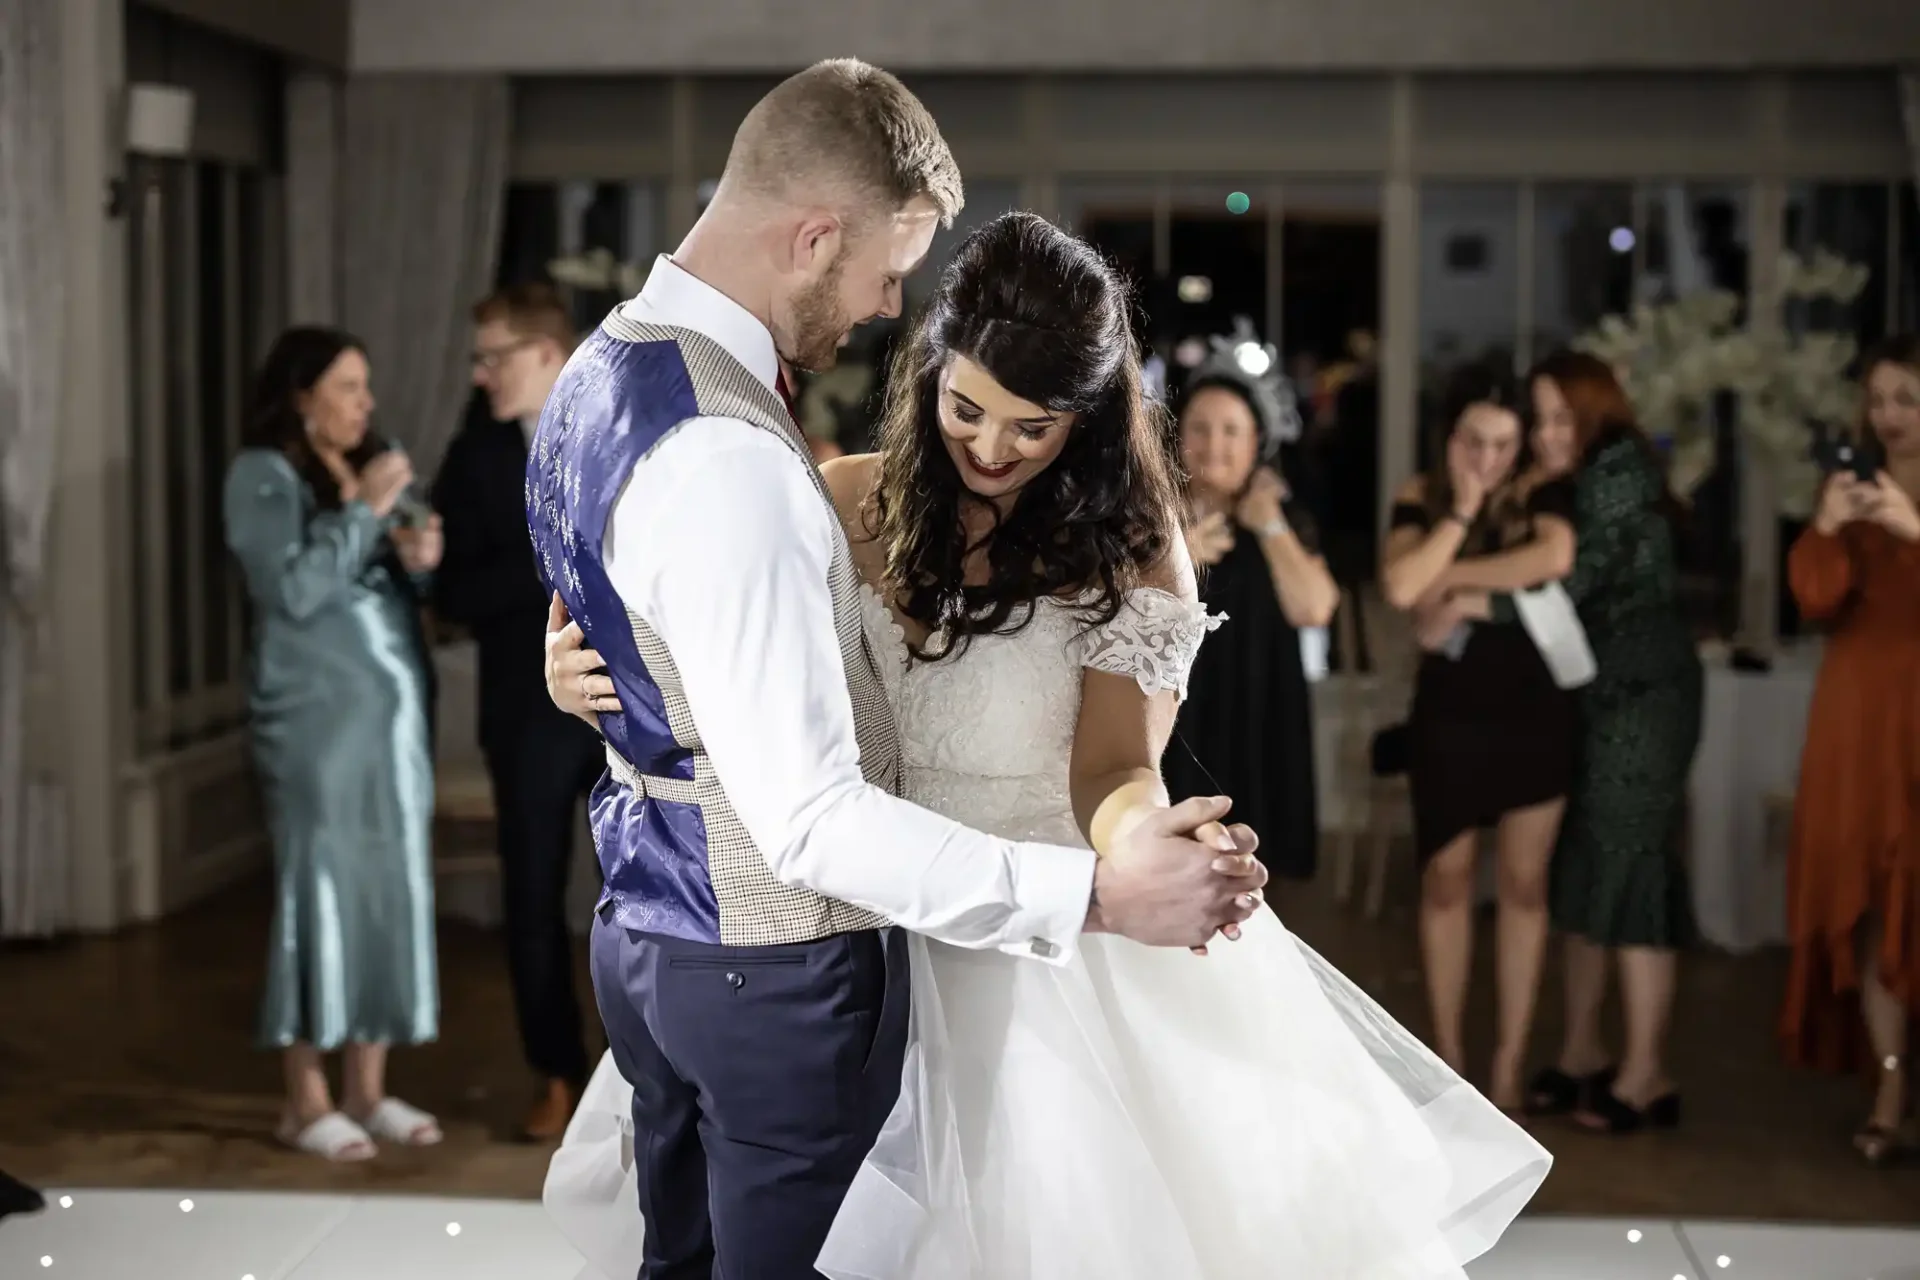 Bride and groom share their first dance at a wedding reception, surrounded by guests.